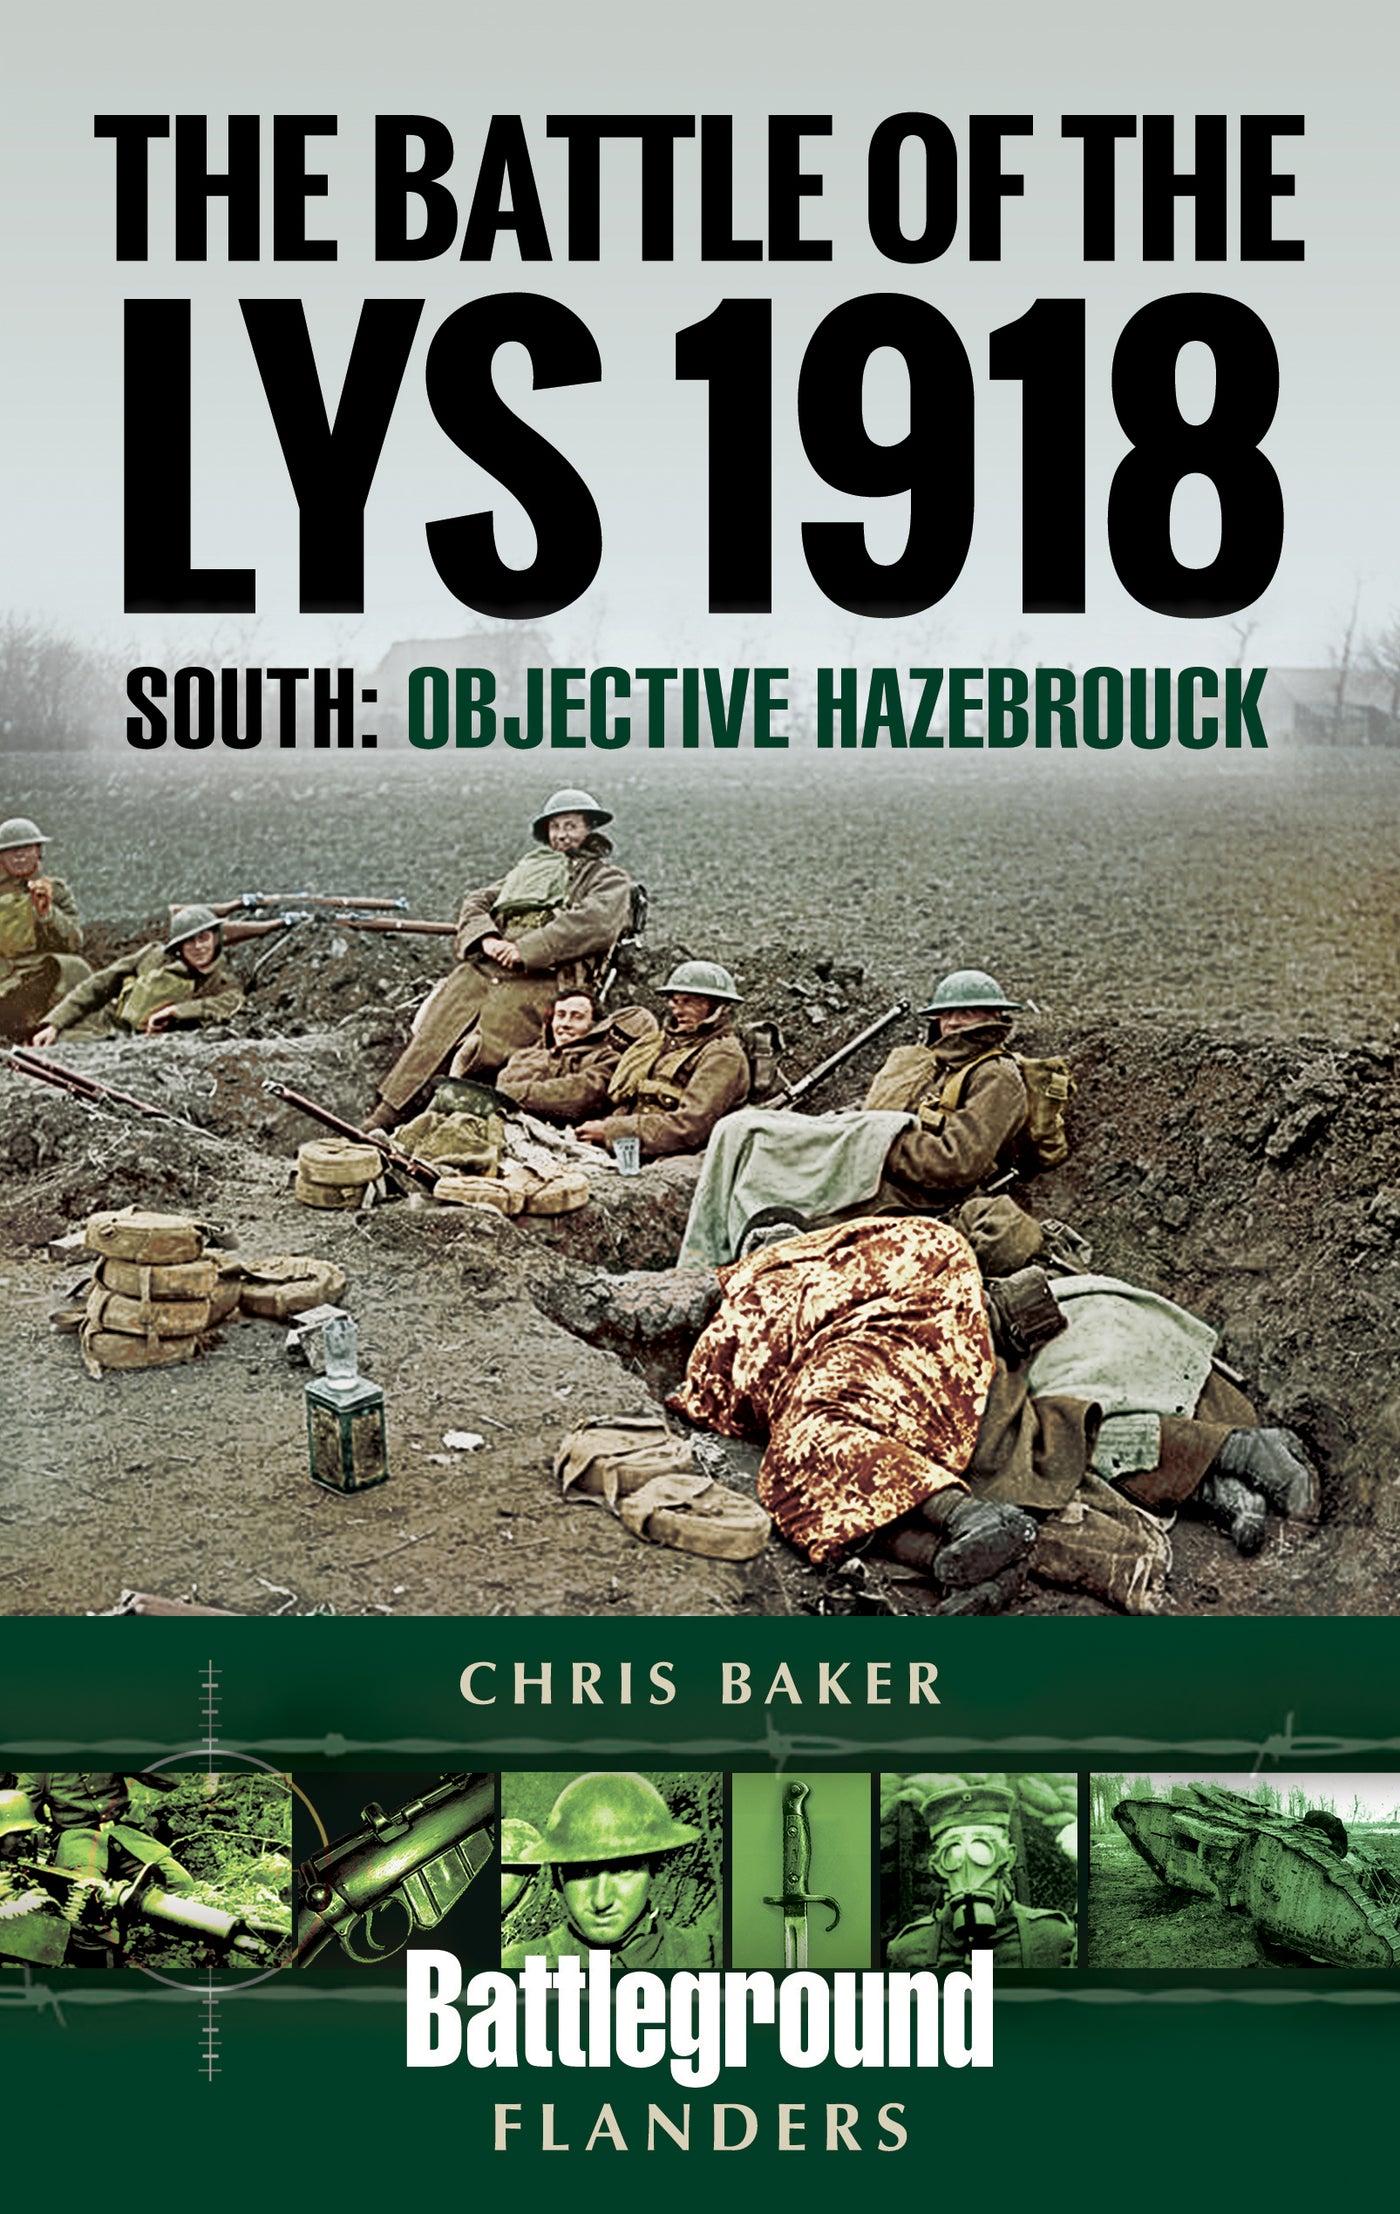 The Battle of the Lys 1918: South